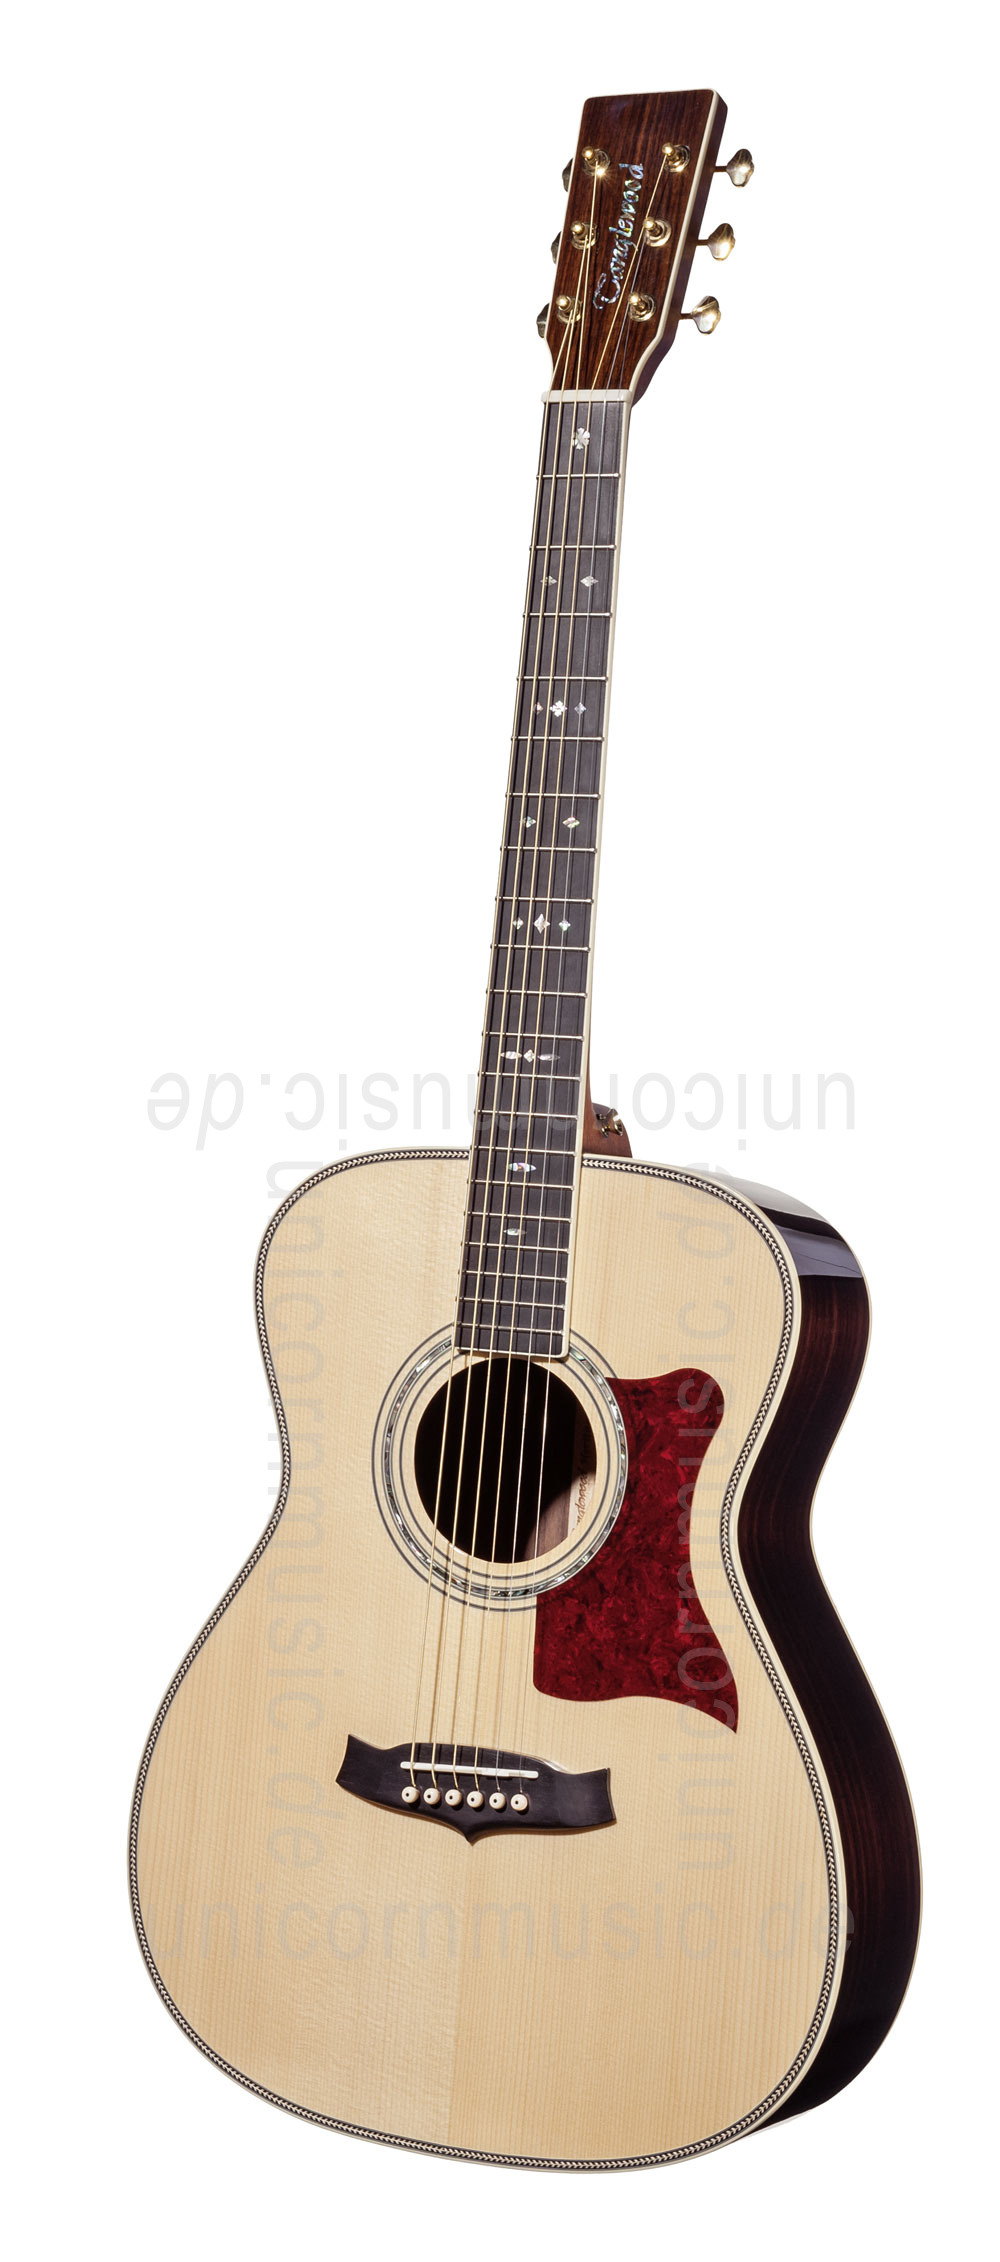 to article description / price Acoustic Guitar TANGLEWOOD TW70/H SR E - Heritage Series - Fishman Sonitone - all solid